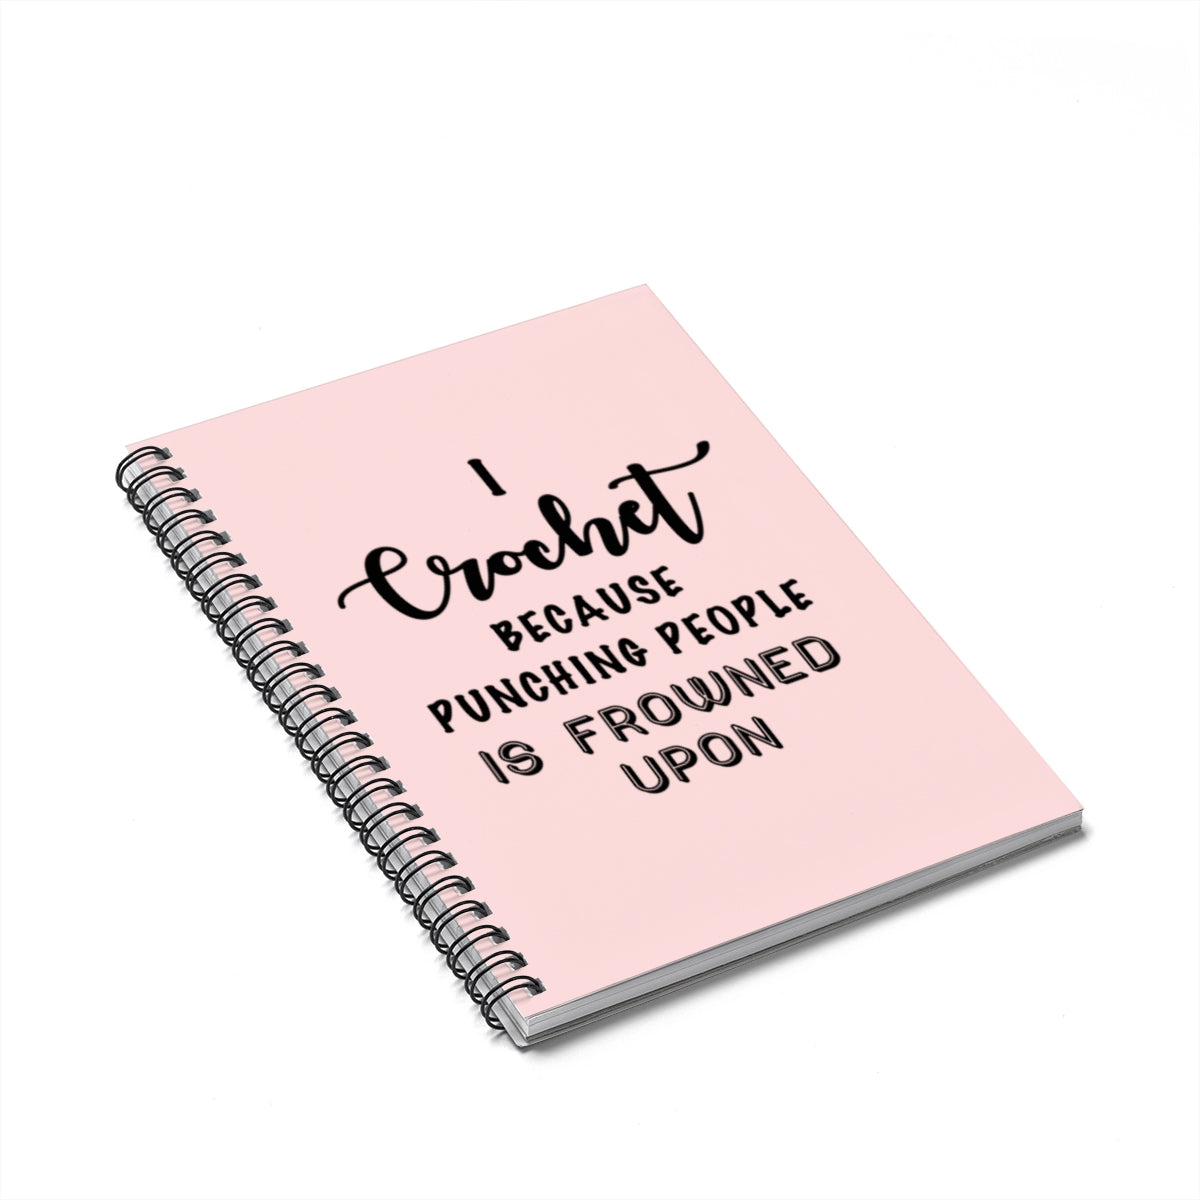 "I Crochet Because Punching People Is Frowned Upon" Black Letters - Spiral Notebook - Ruled Line